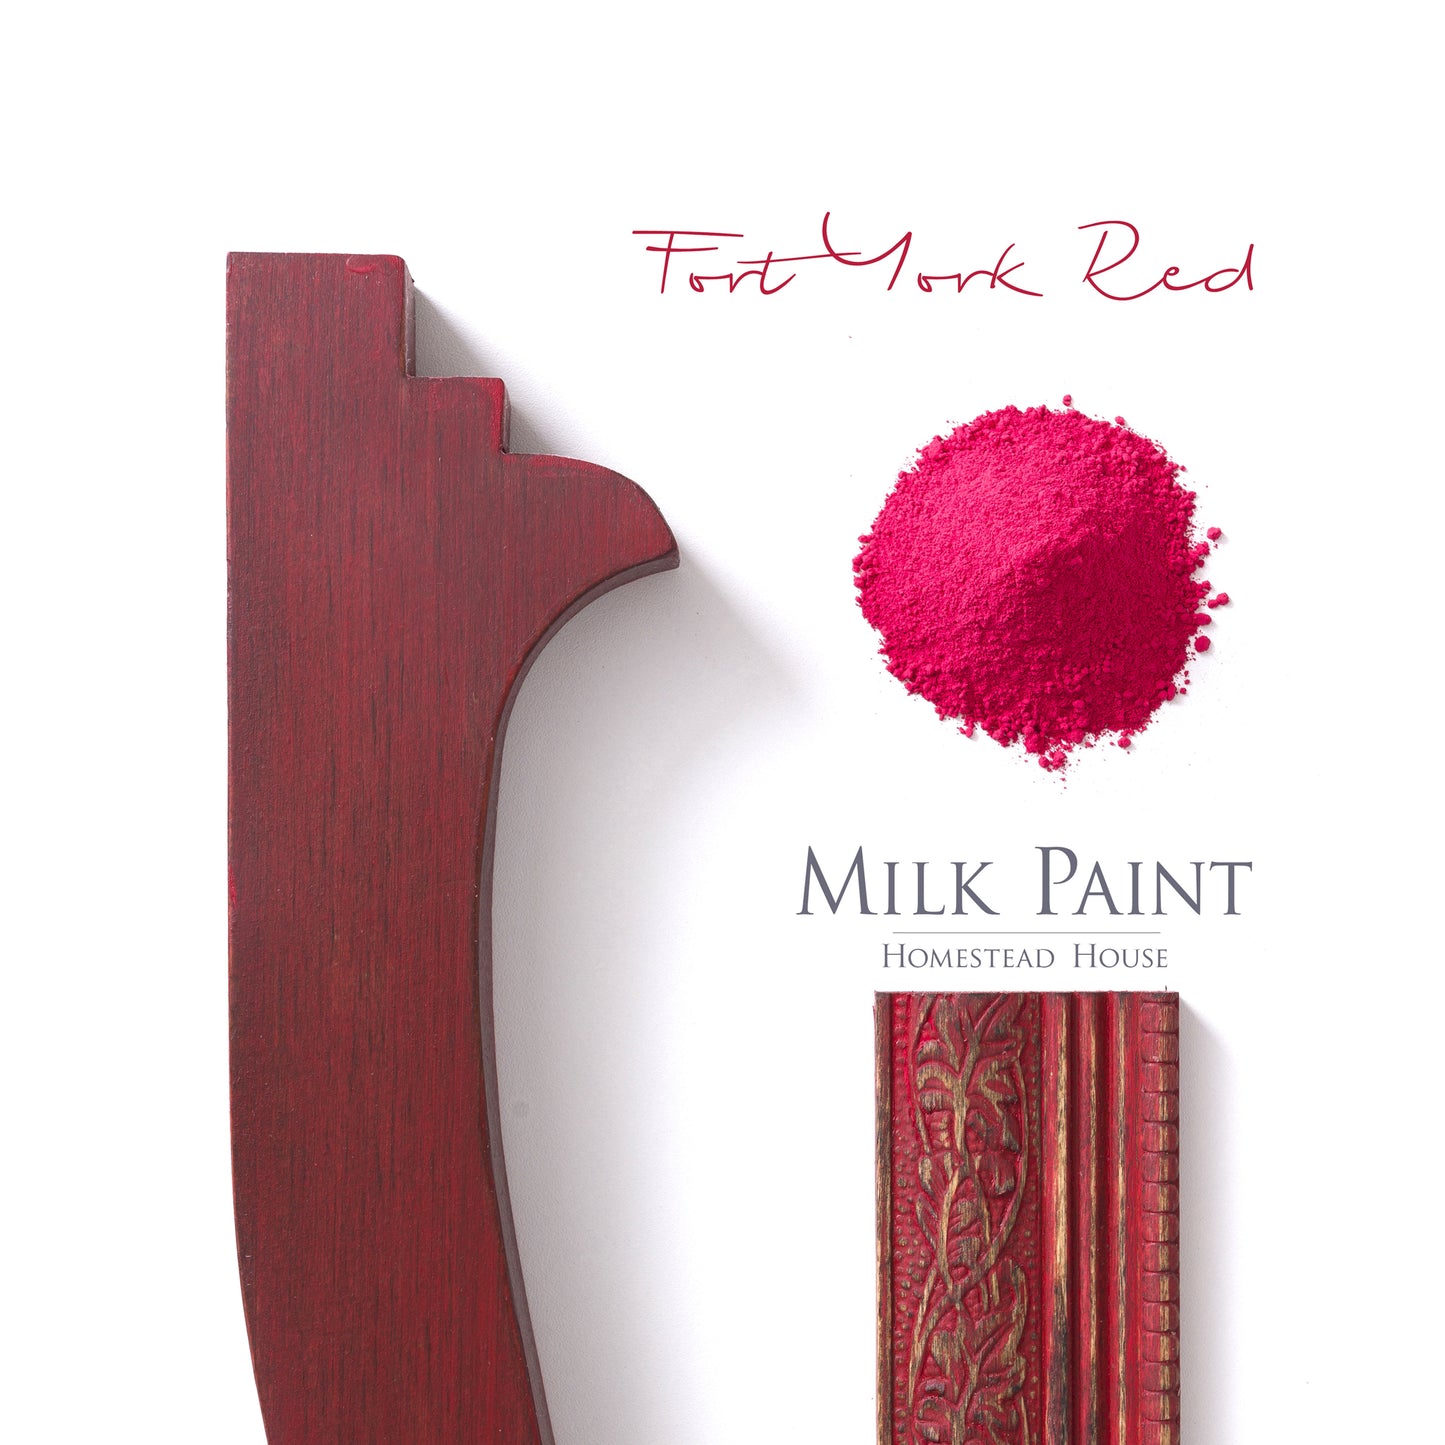 Milk Paint from Homestead House in Fort York Red, a bold yet cheerful bright red.  |  homesteadhouse.ca